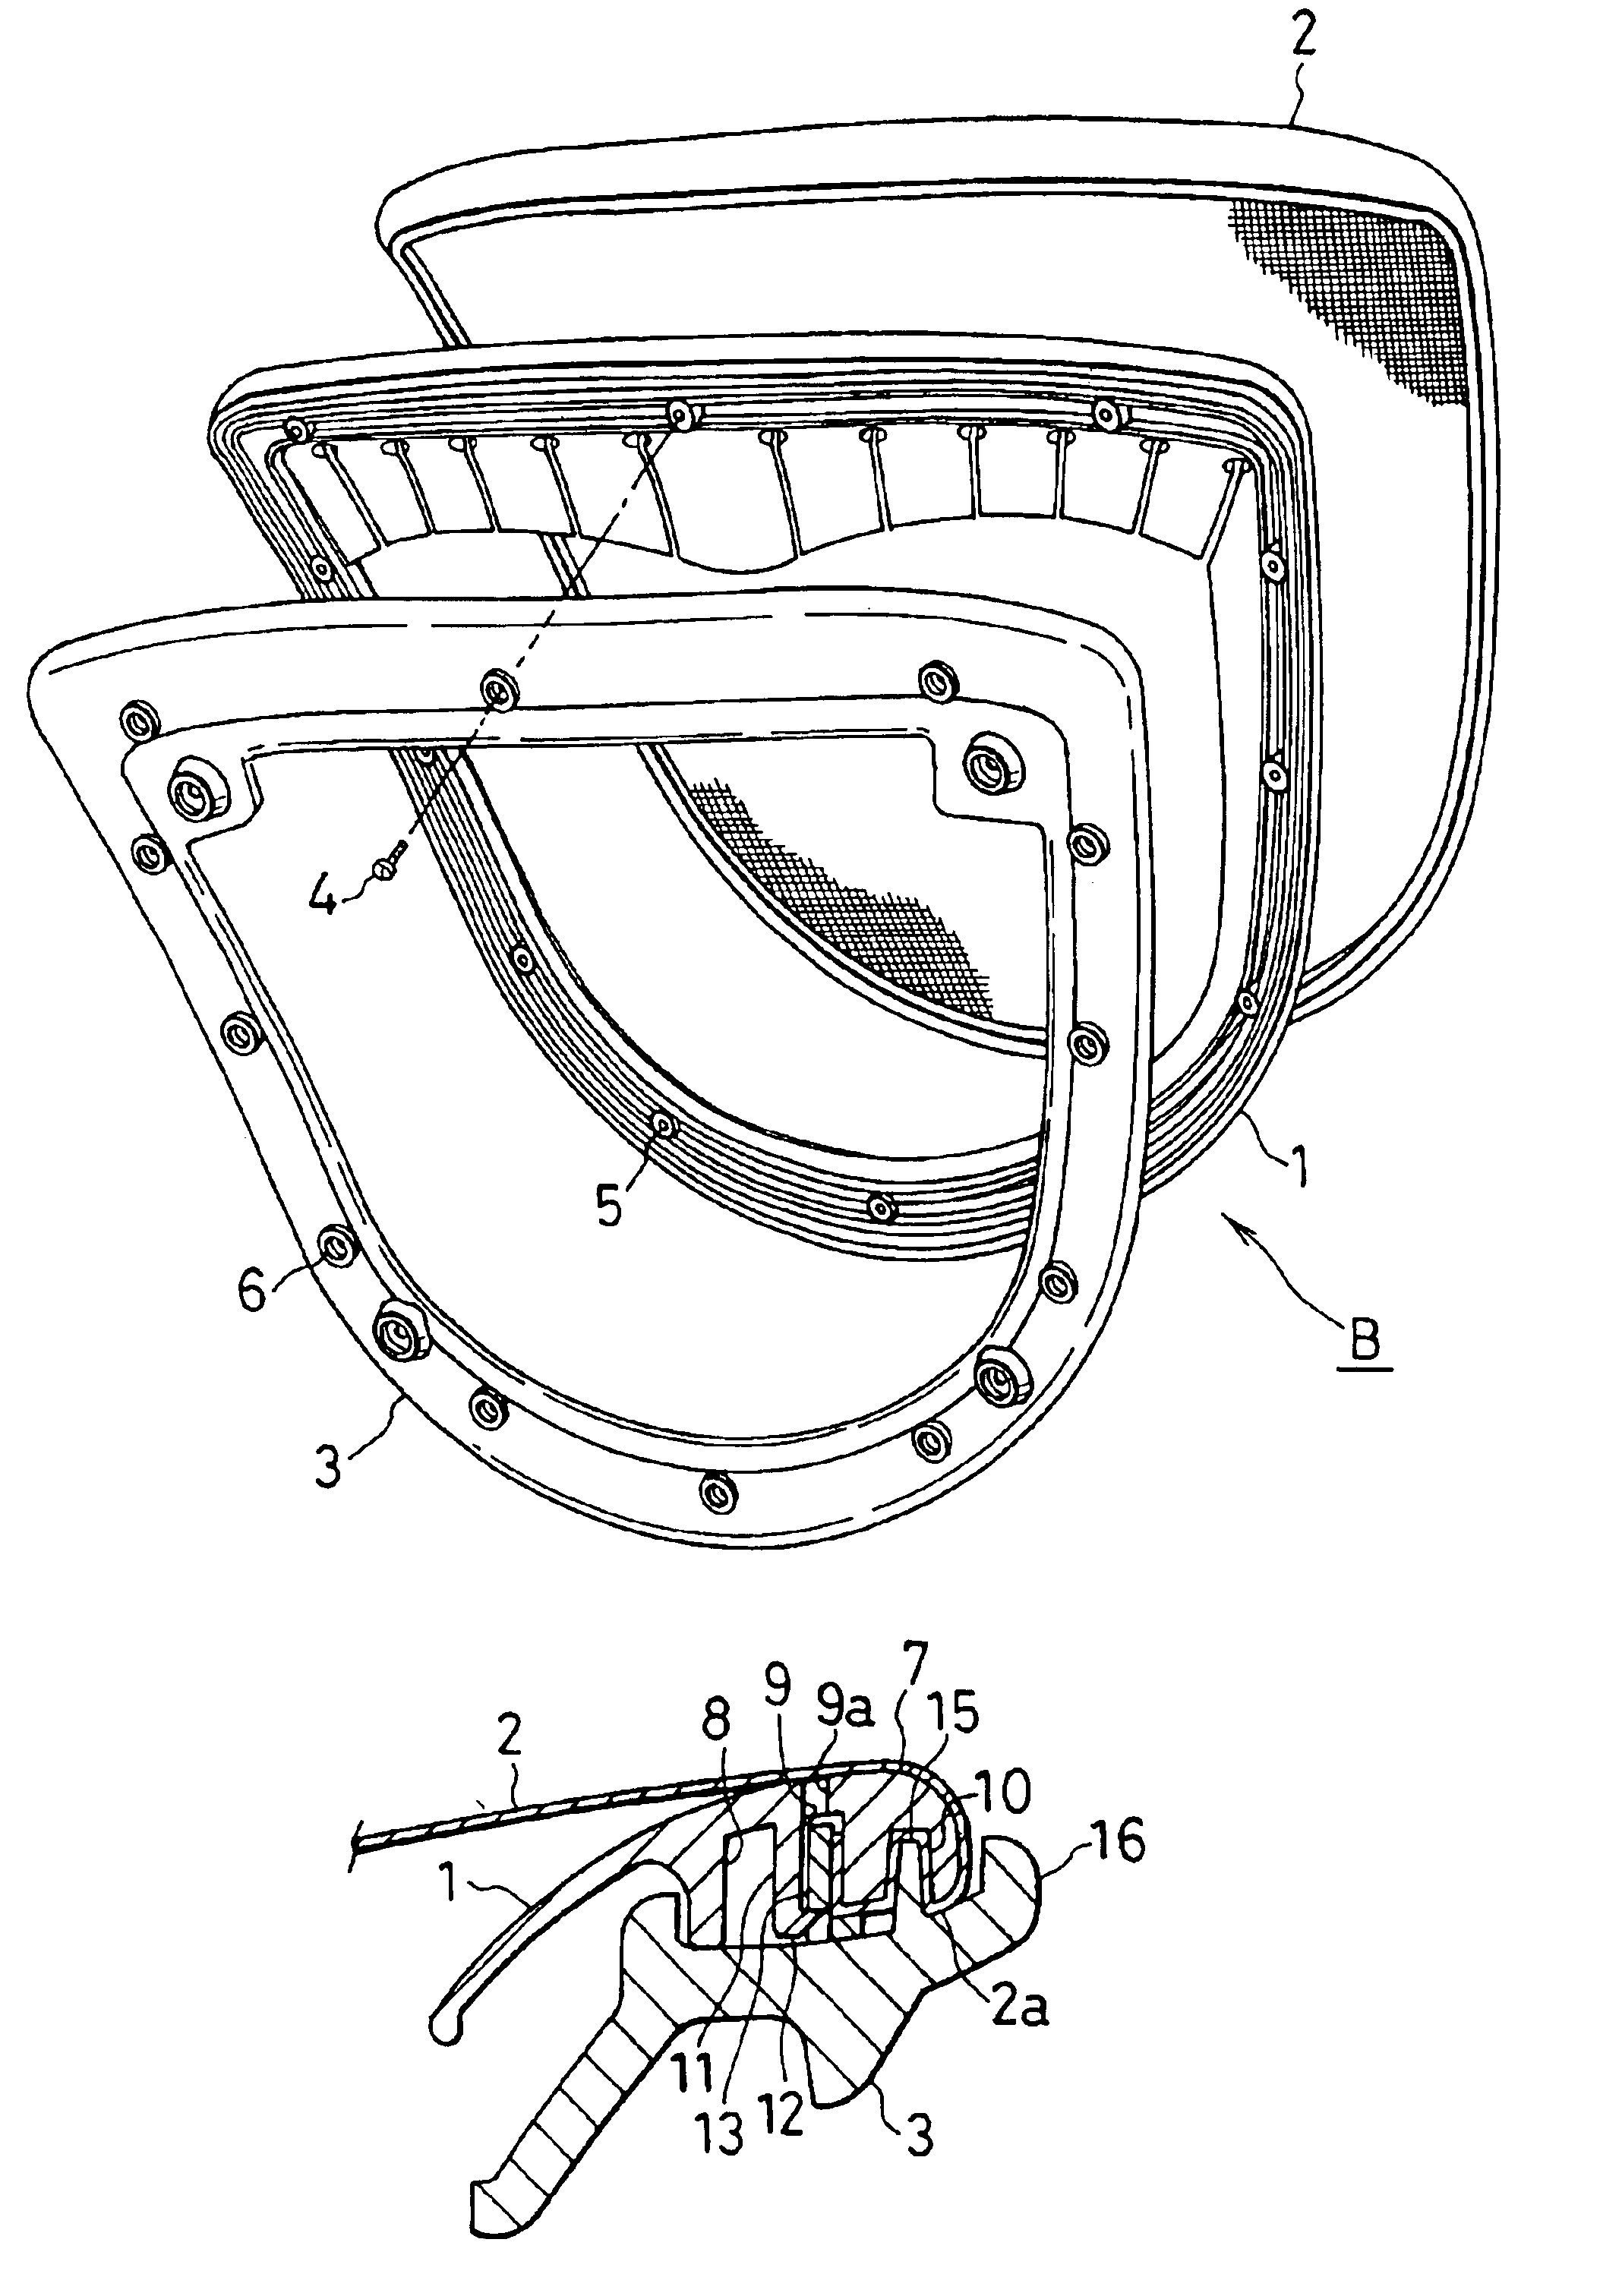 Structure for mounting a net member to a frame for a seat or backrest of a chair